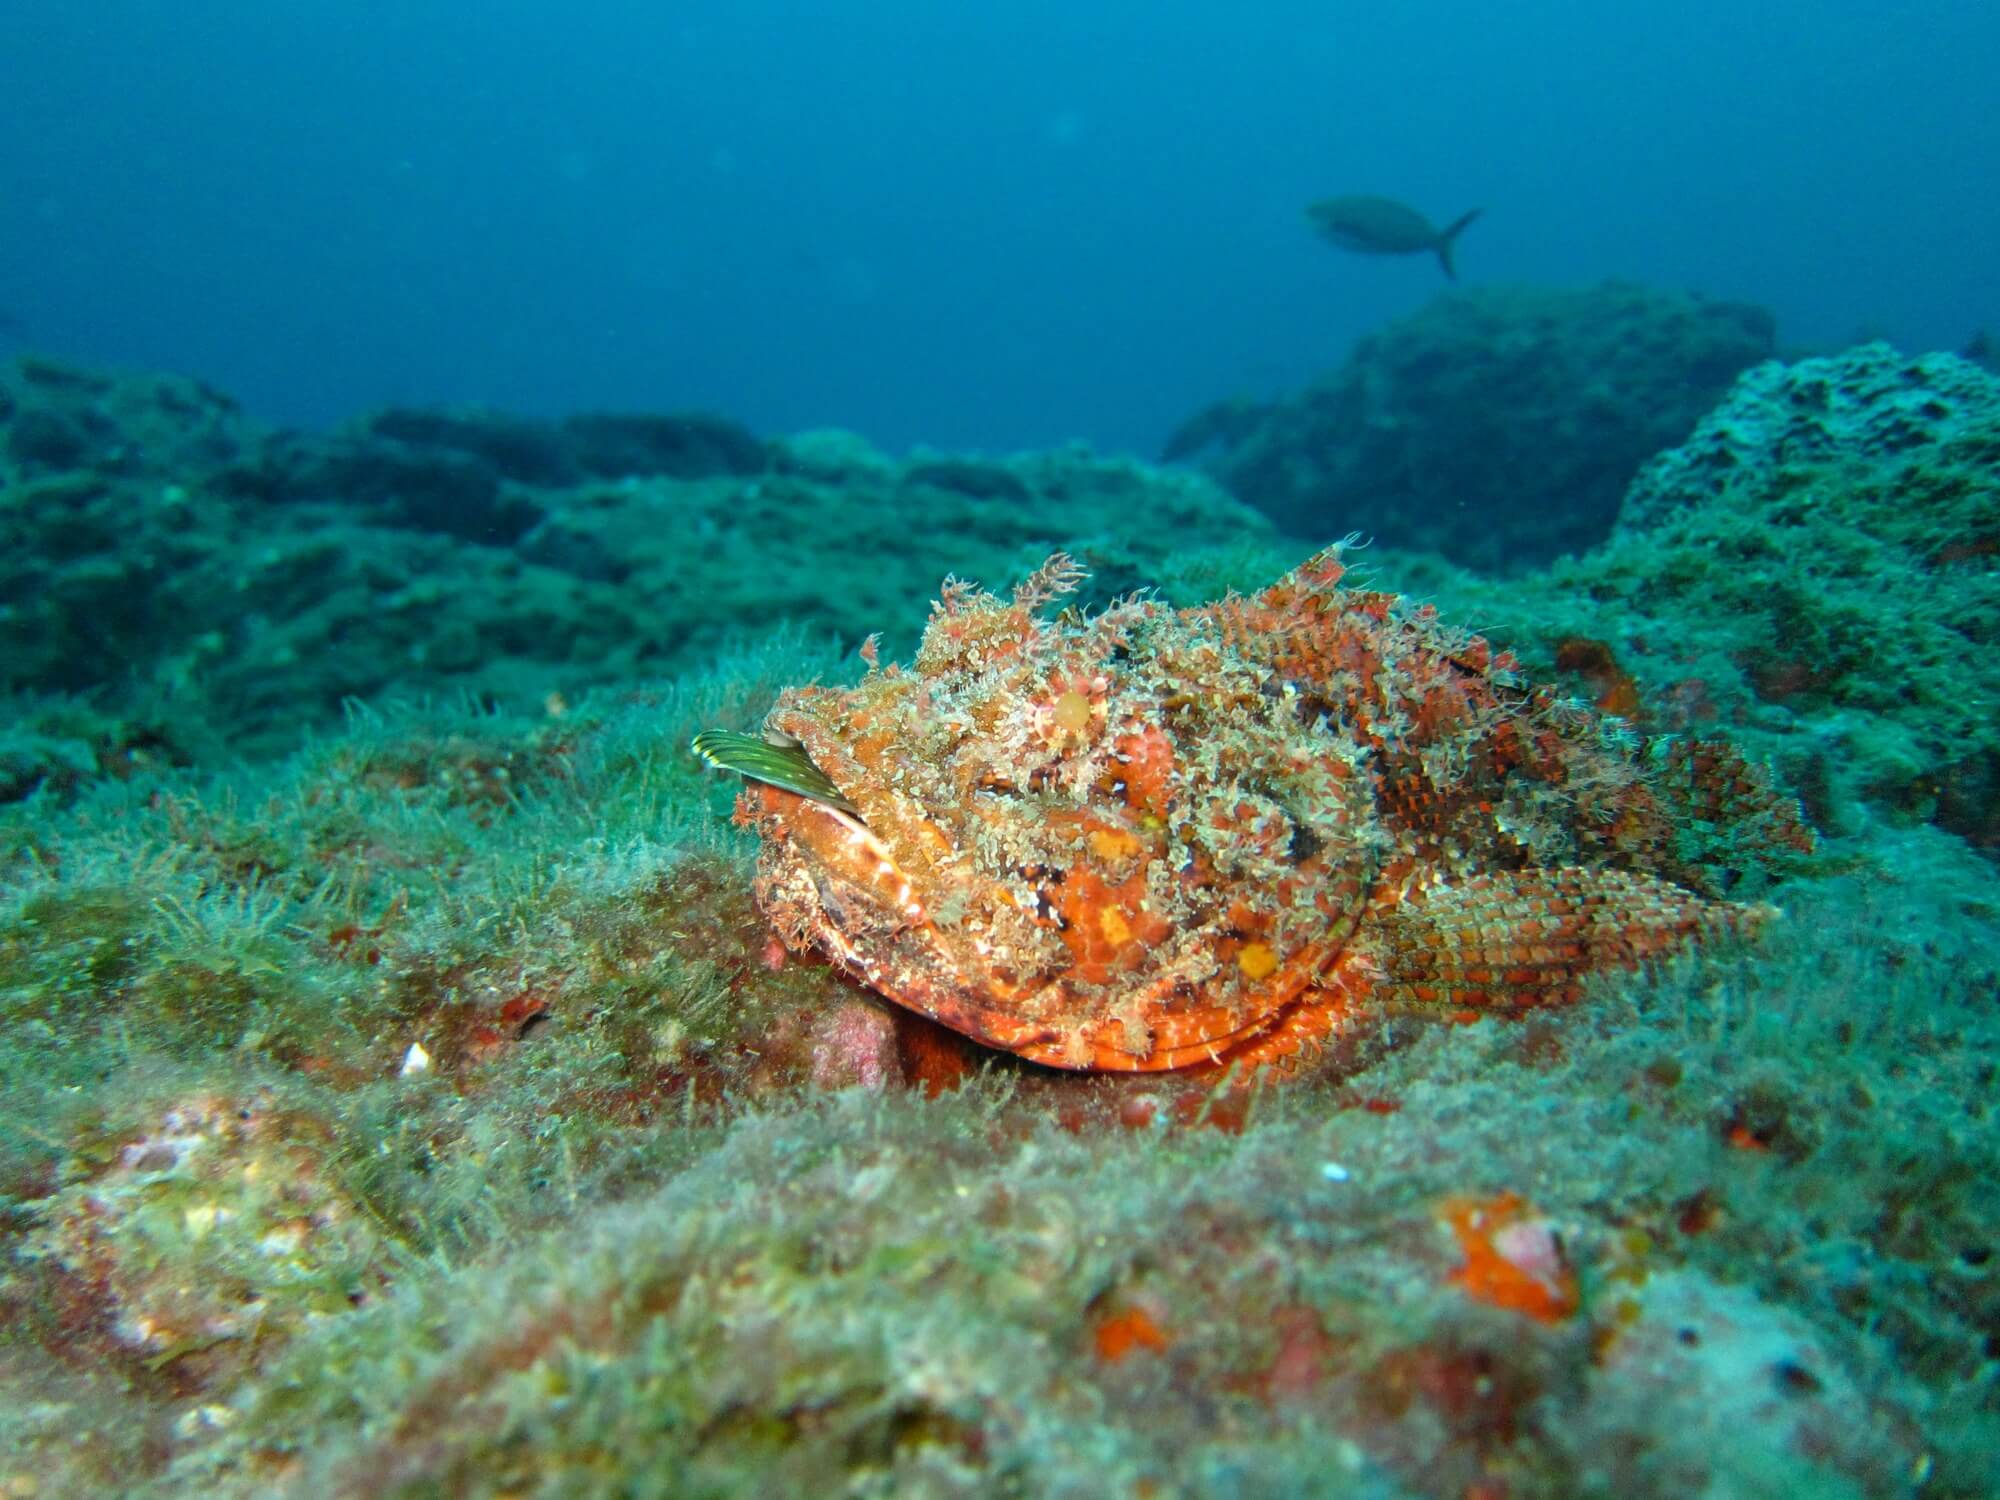 A spotted scorpionfish on the reef.